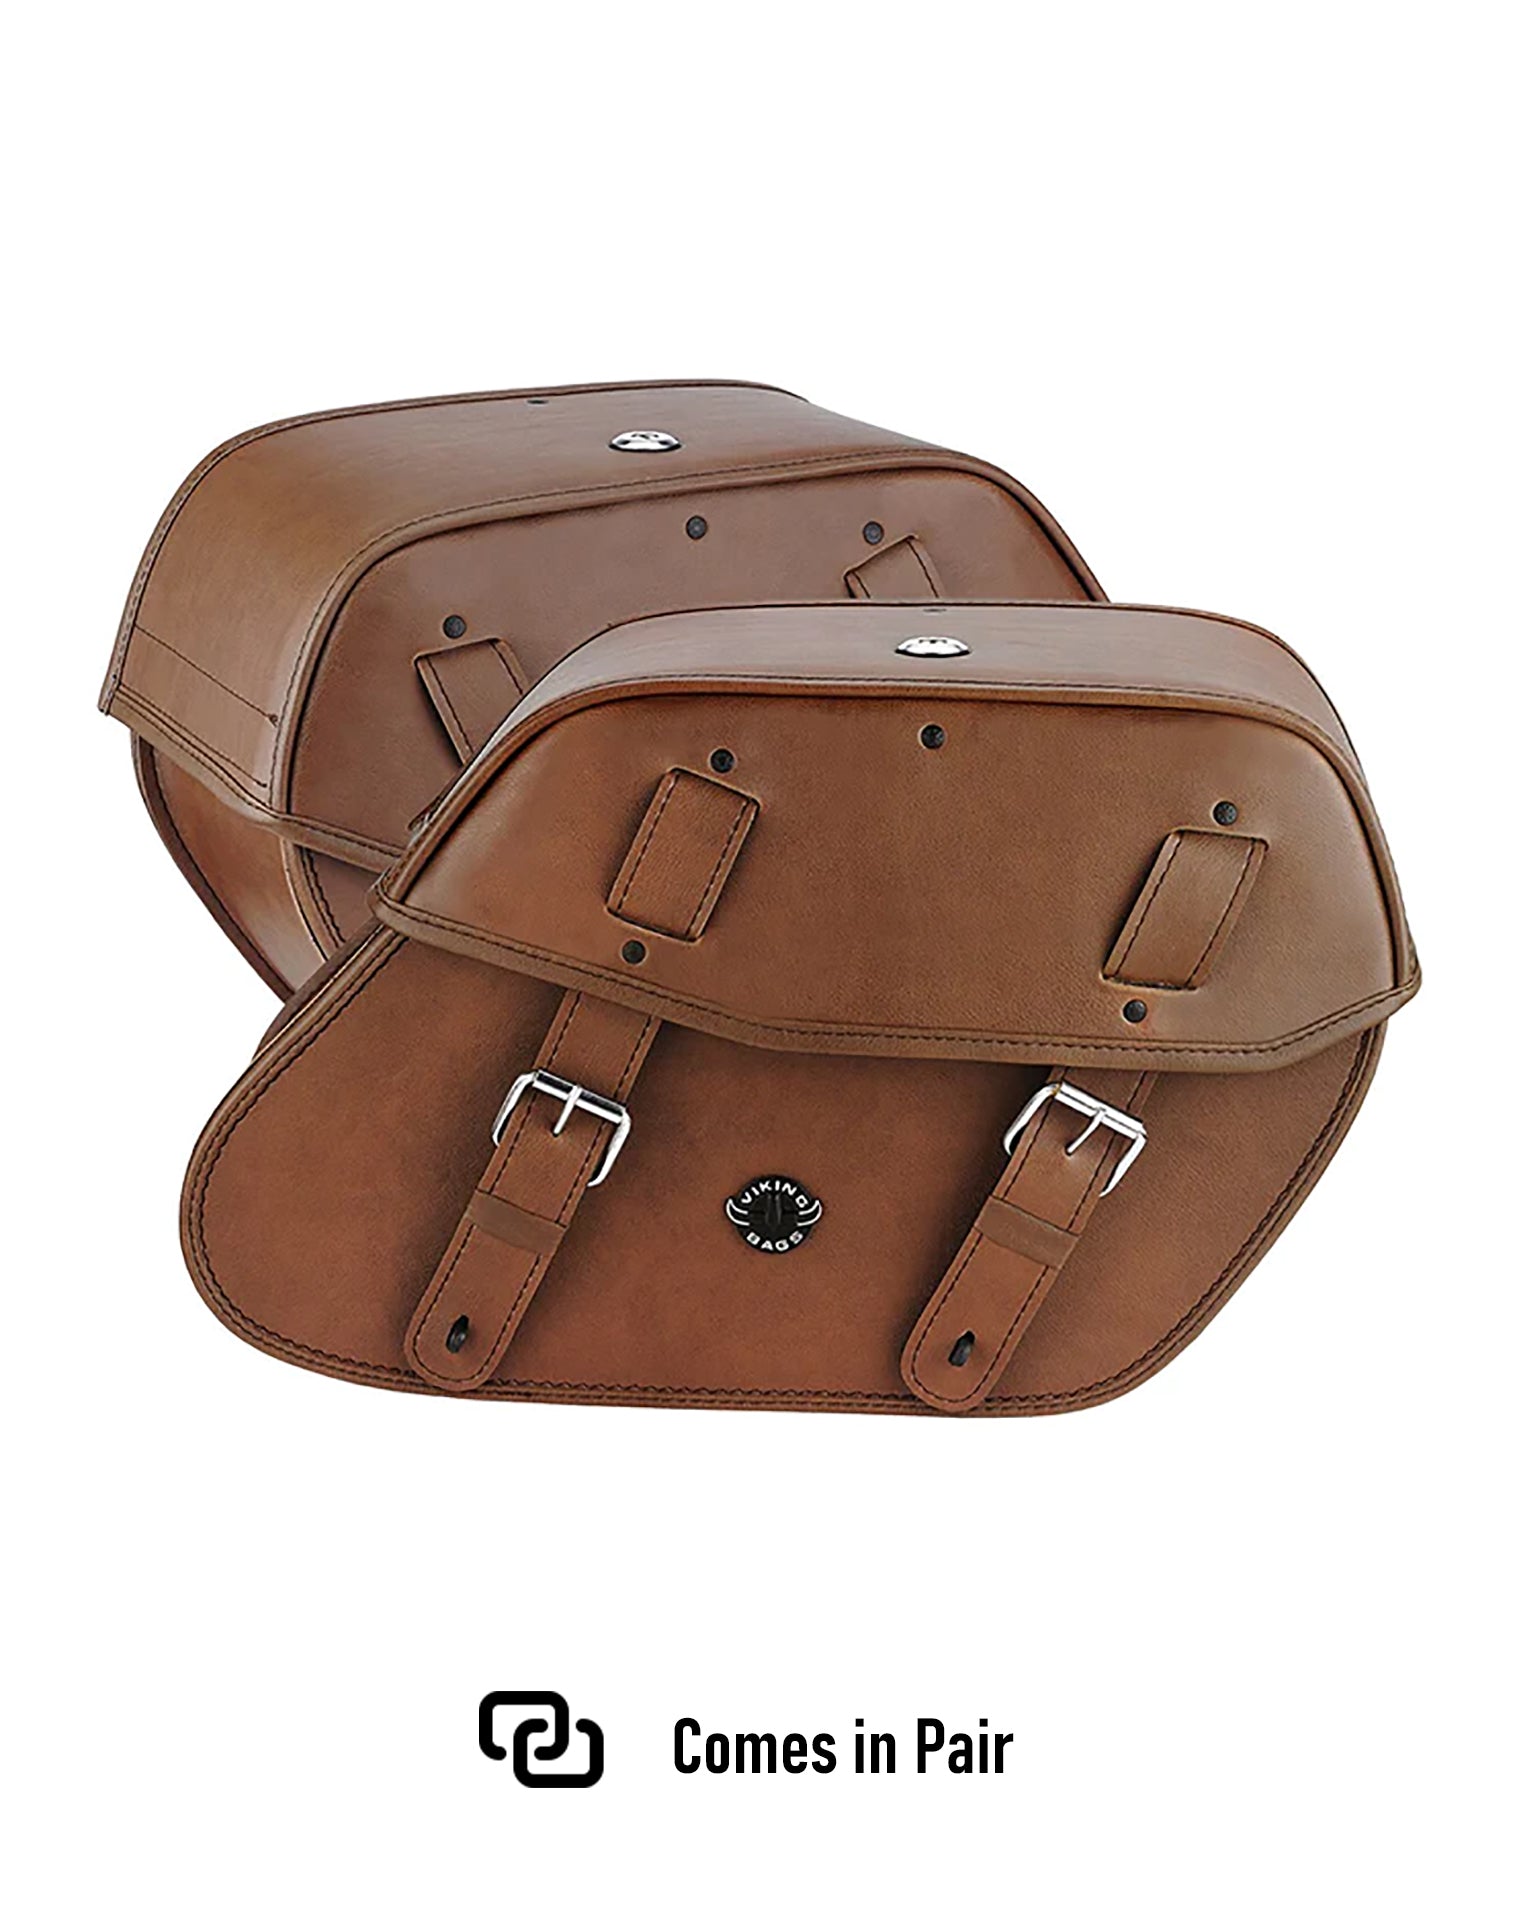 Viking Odin Brown Large Indian Scout Leather Motorcycle Saddlebags Weather Resistant Bags Comes in Pair